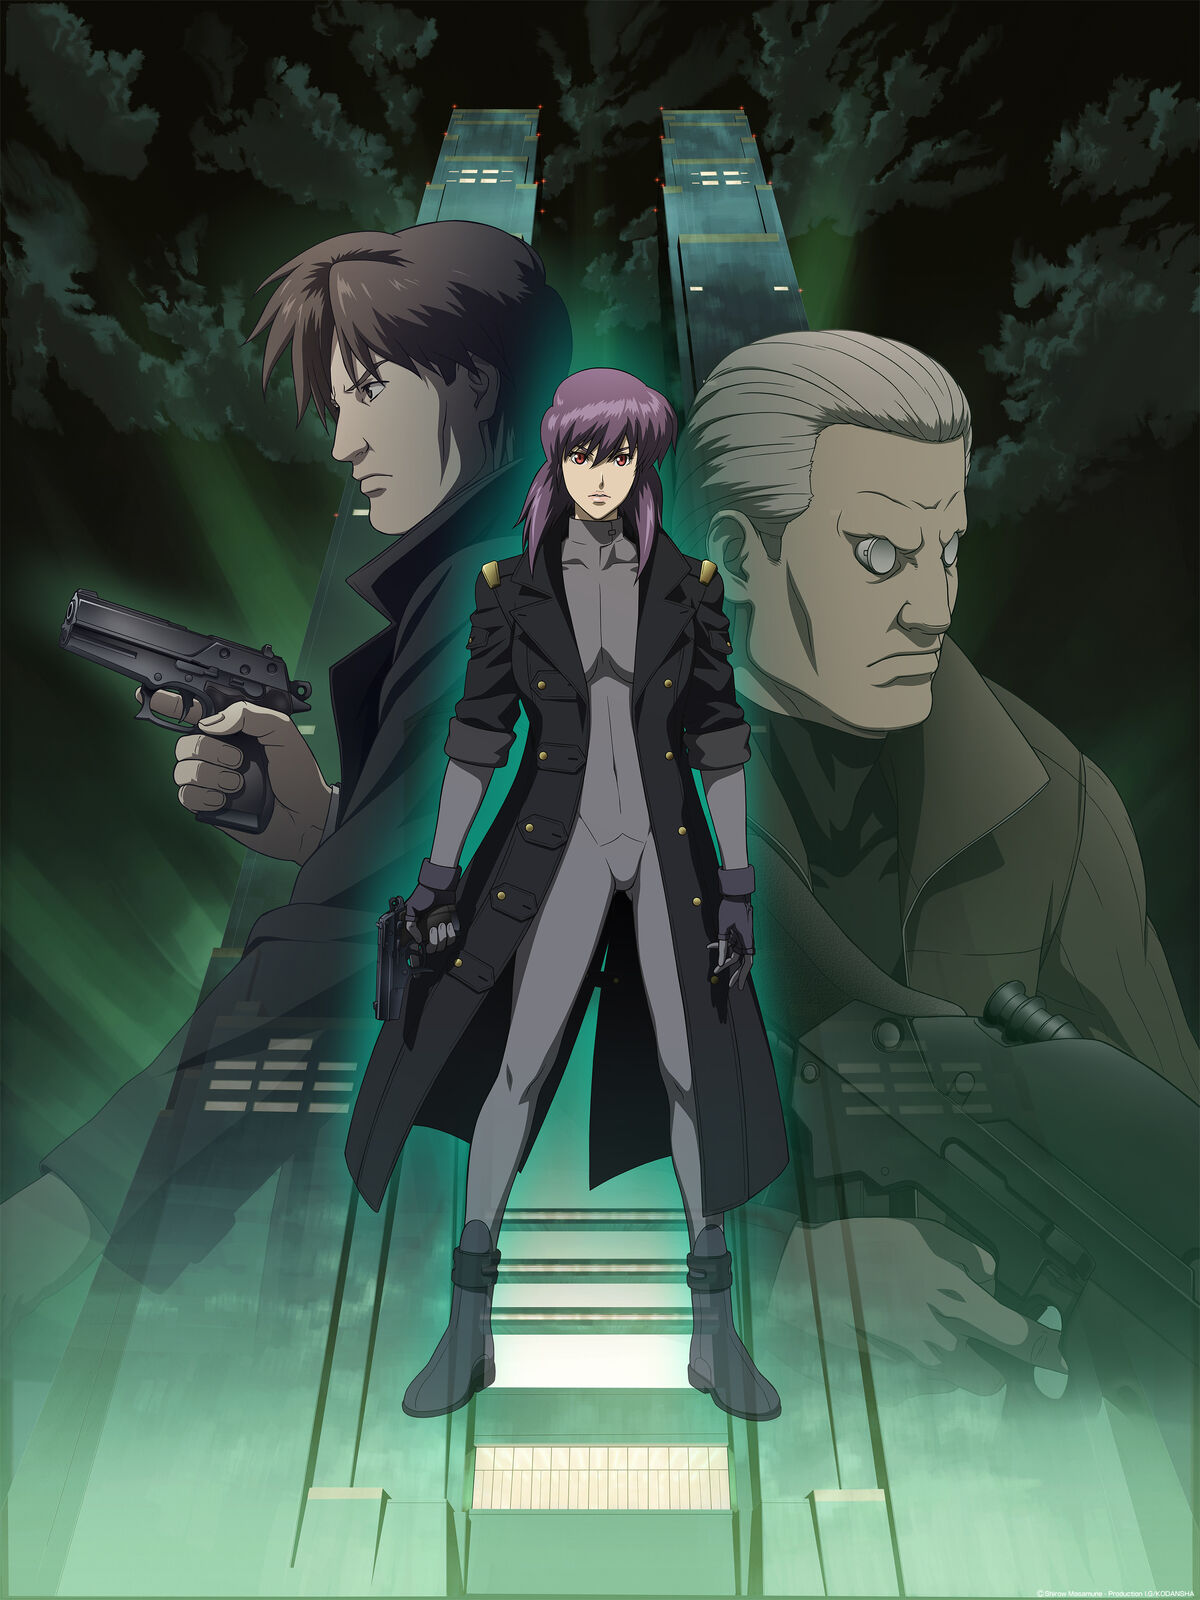 Ghost in the Shell: Stand Alone Complex - Wikipedia